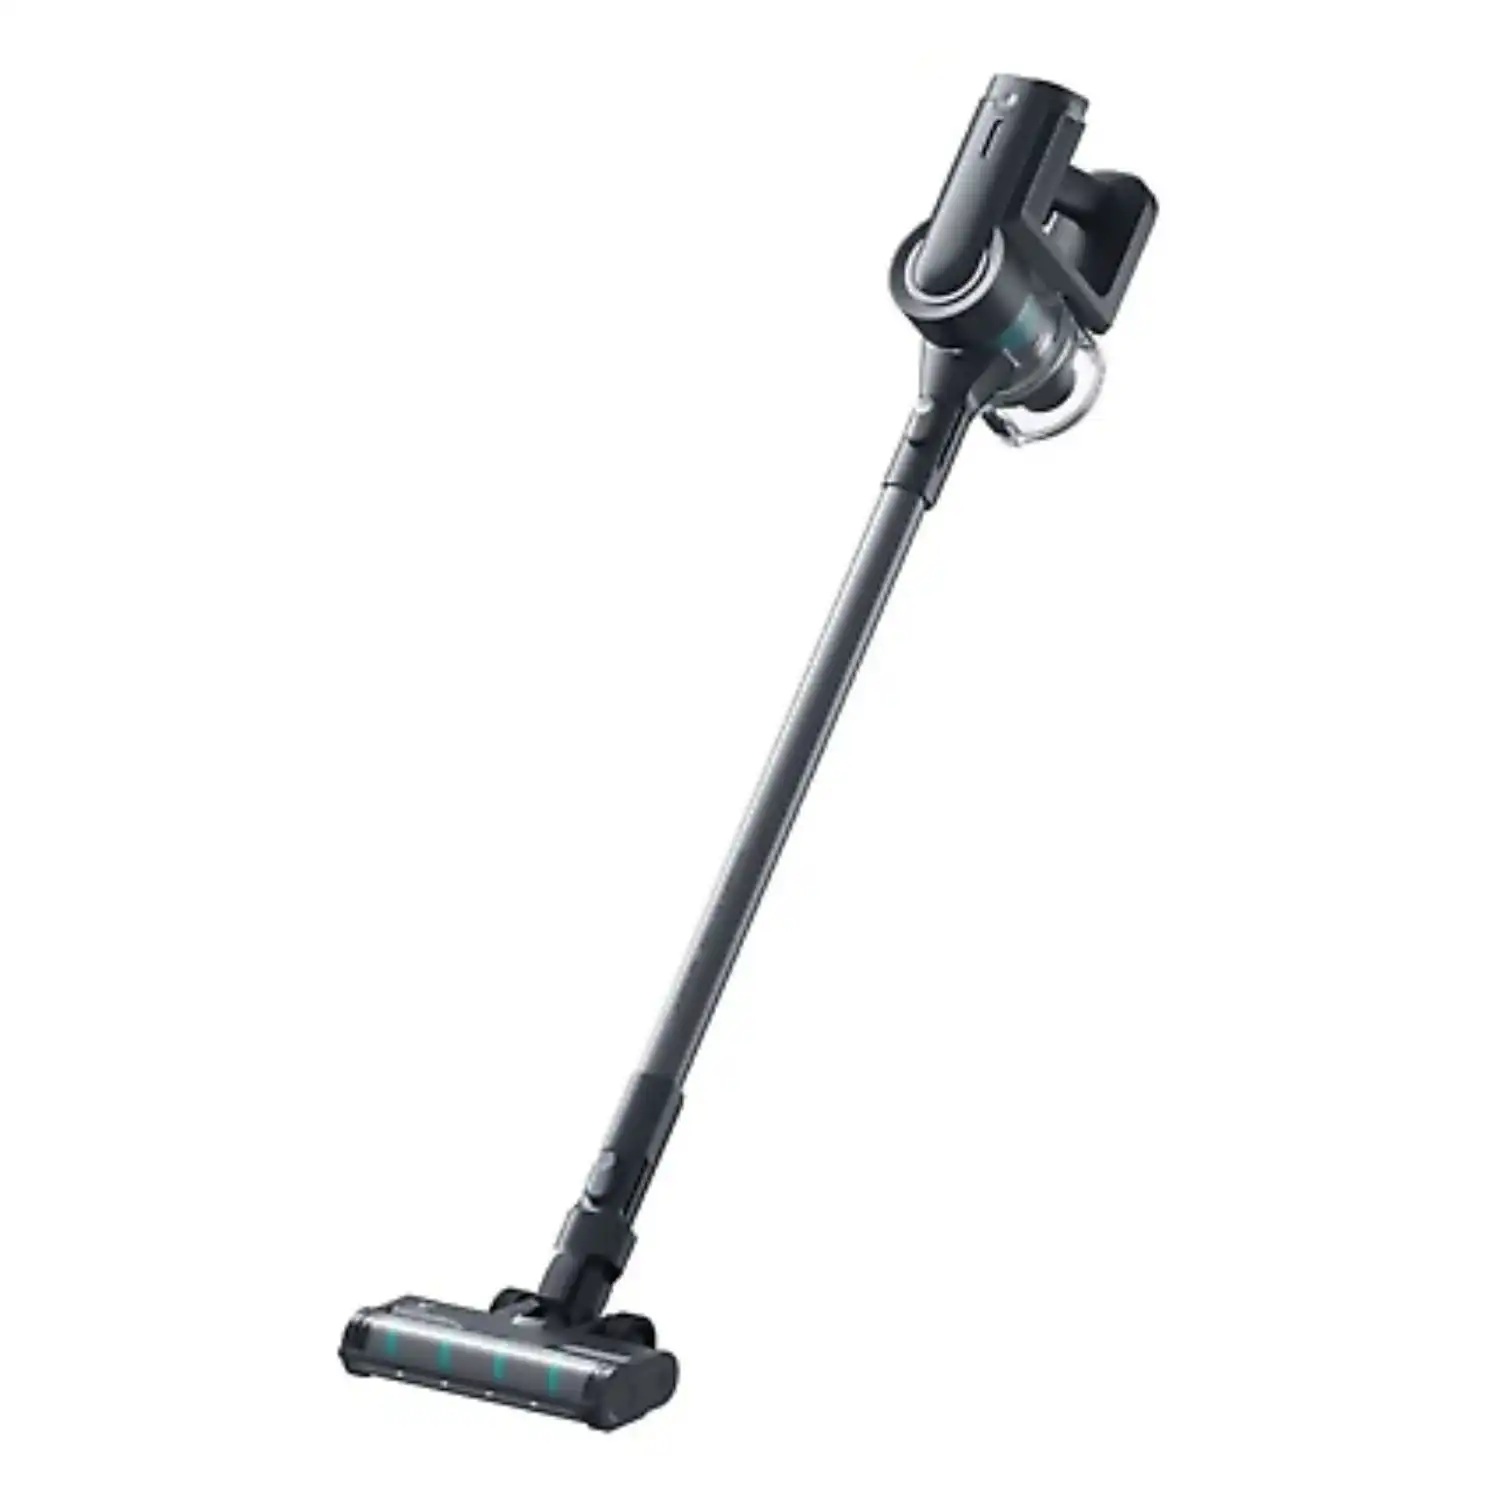 Viomi A9 Cordless Handheld Vacuum Cleaner, Built-in 5 Filters, Lightweight and Portable